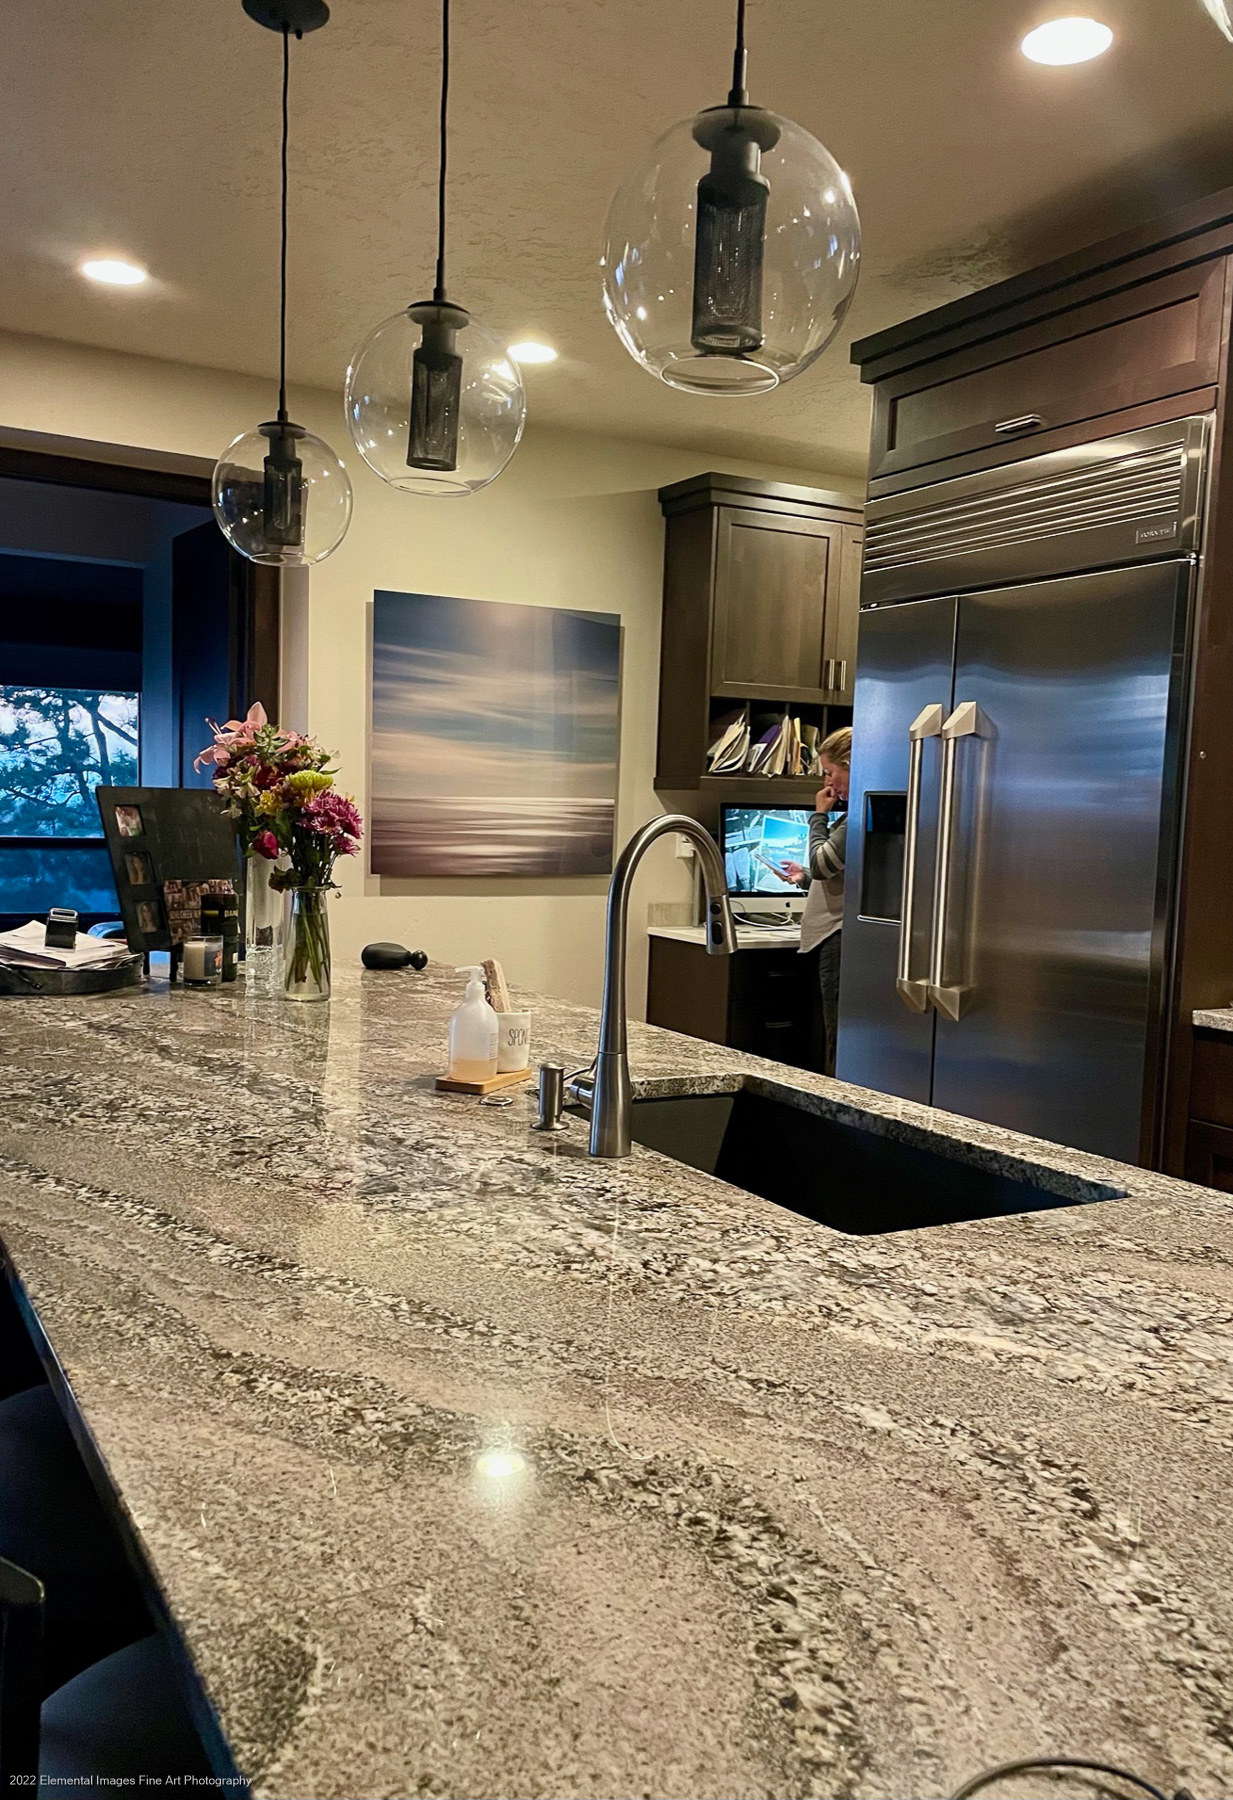 Sea and Sky in Kitchen |  |  |  - © 2022 Elemental Images Fine Art Photography - All Rights Reserved Worldwide